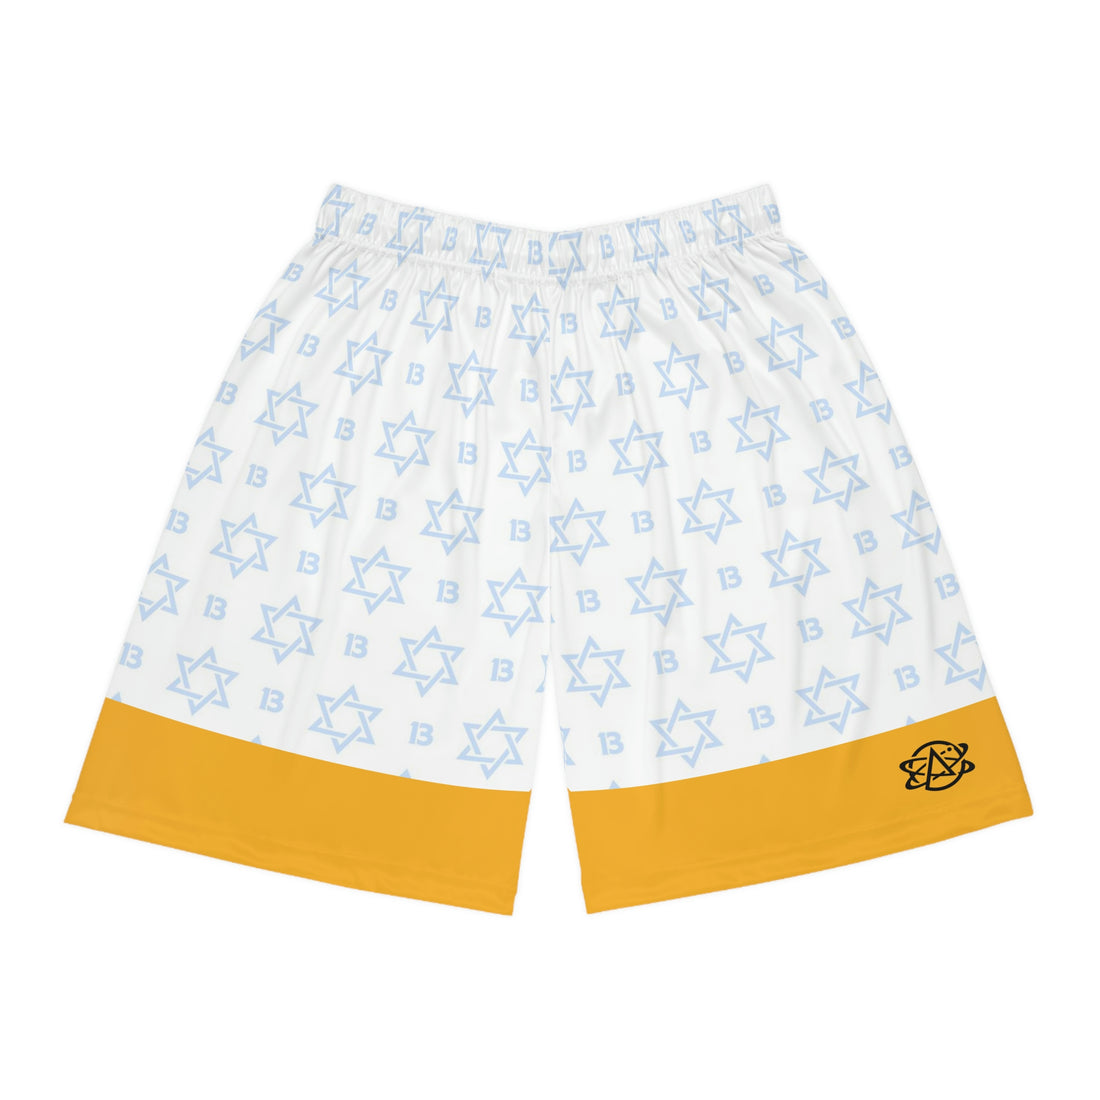 Father Yod's Team Ice Shorts